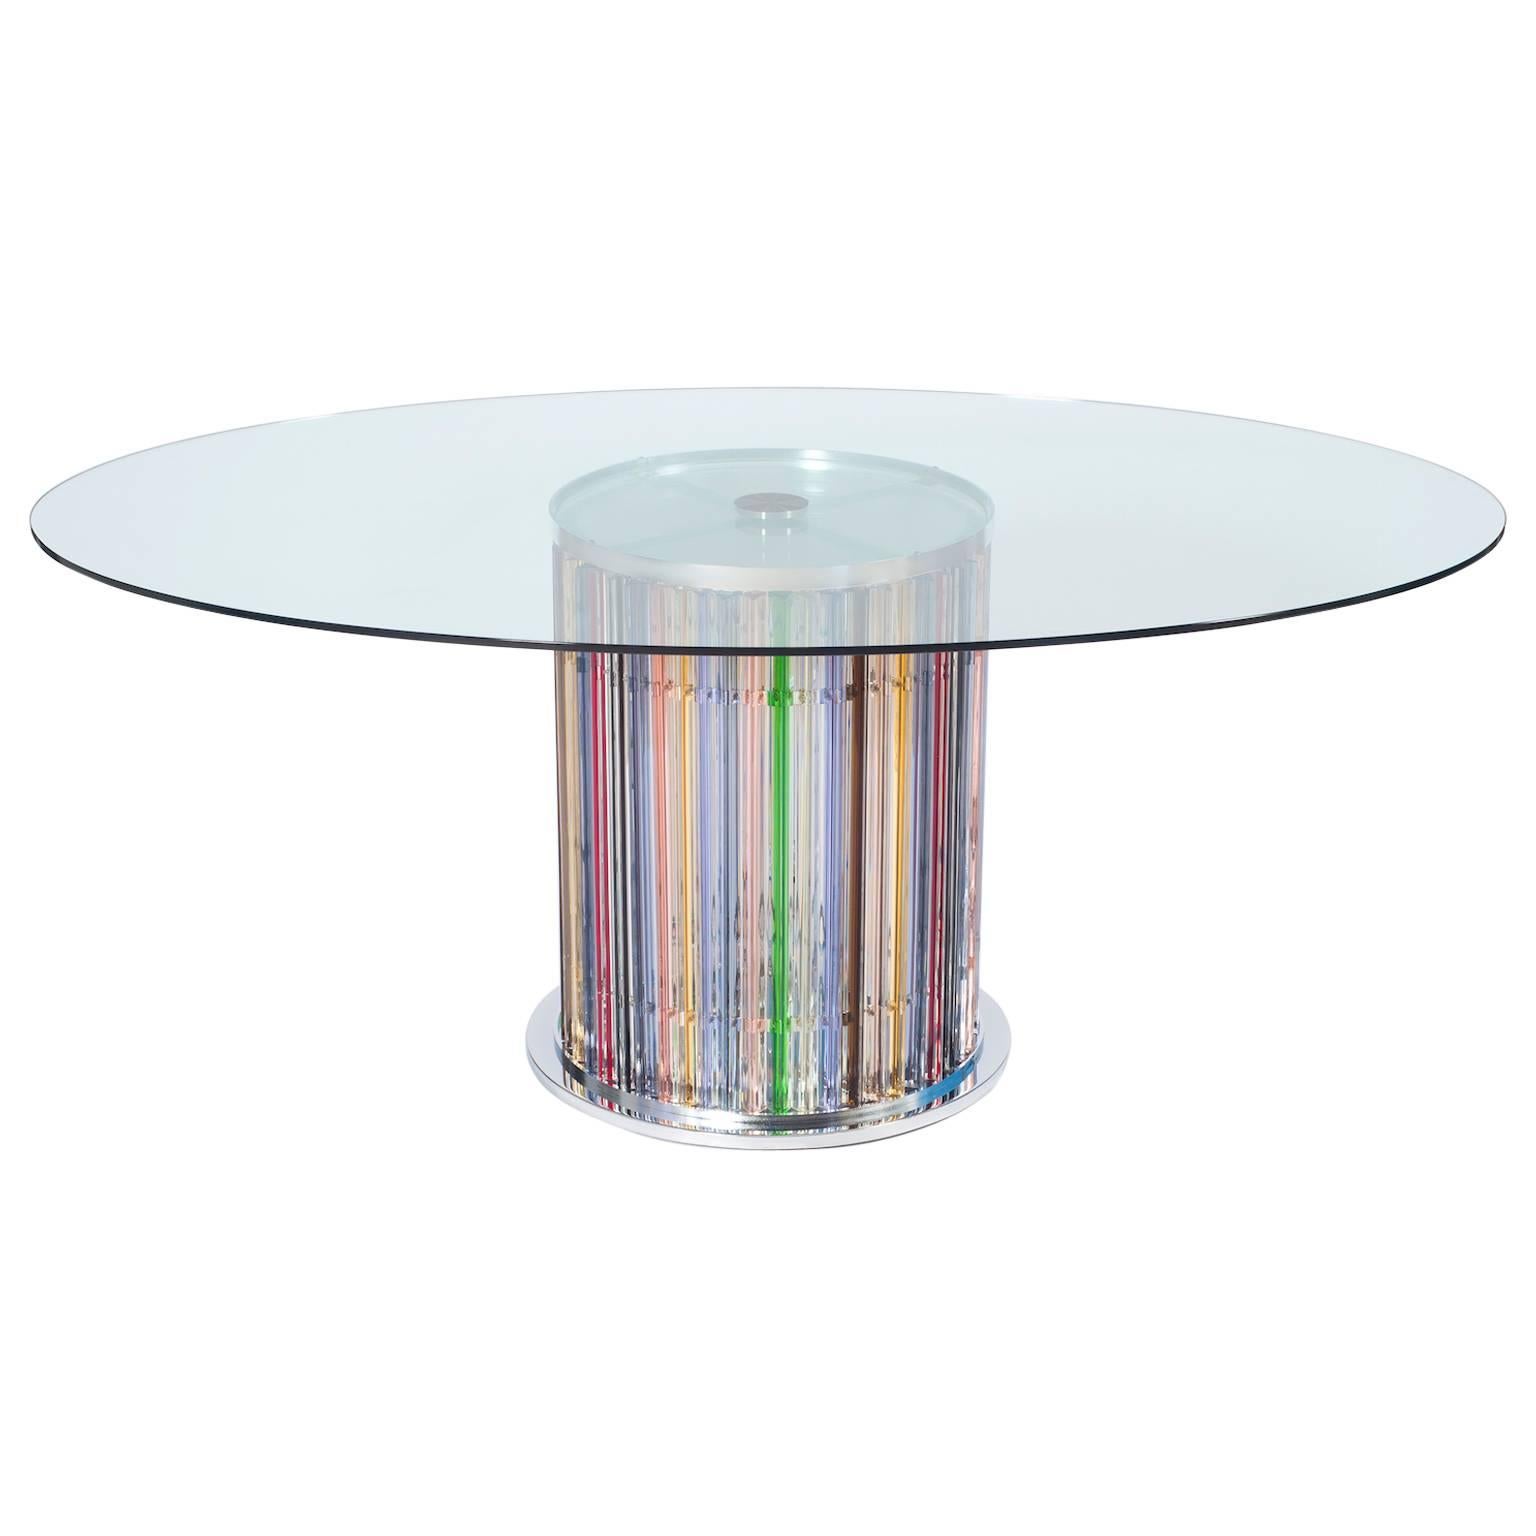 Italian Murano Dining Table with Lights in the Stem, circa 1980s